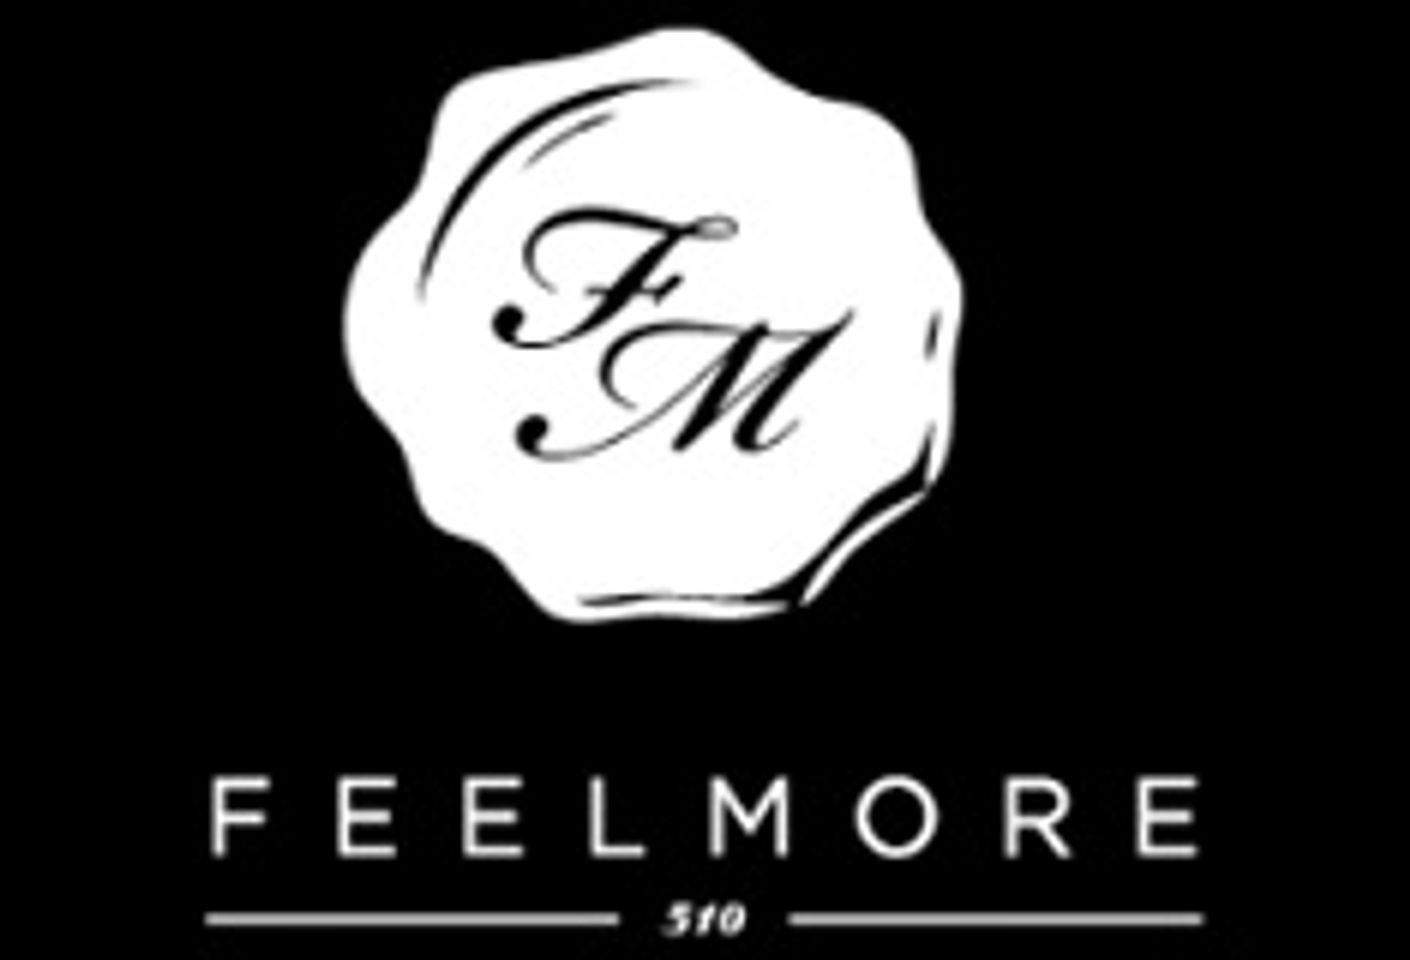 Feelmore510 Adult Gallery Wants to Be a Voter Polling Location